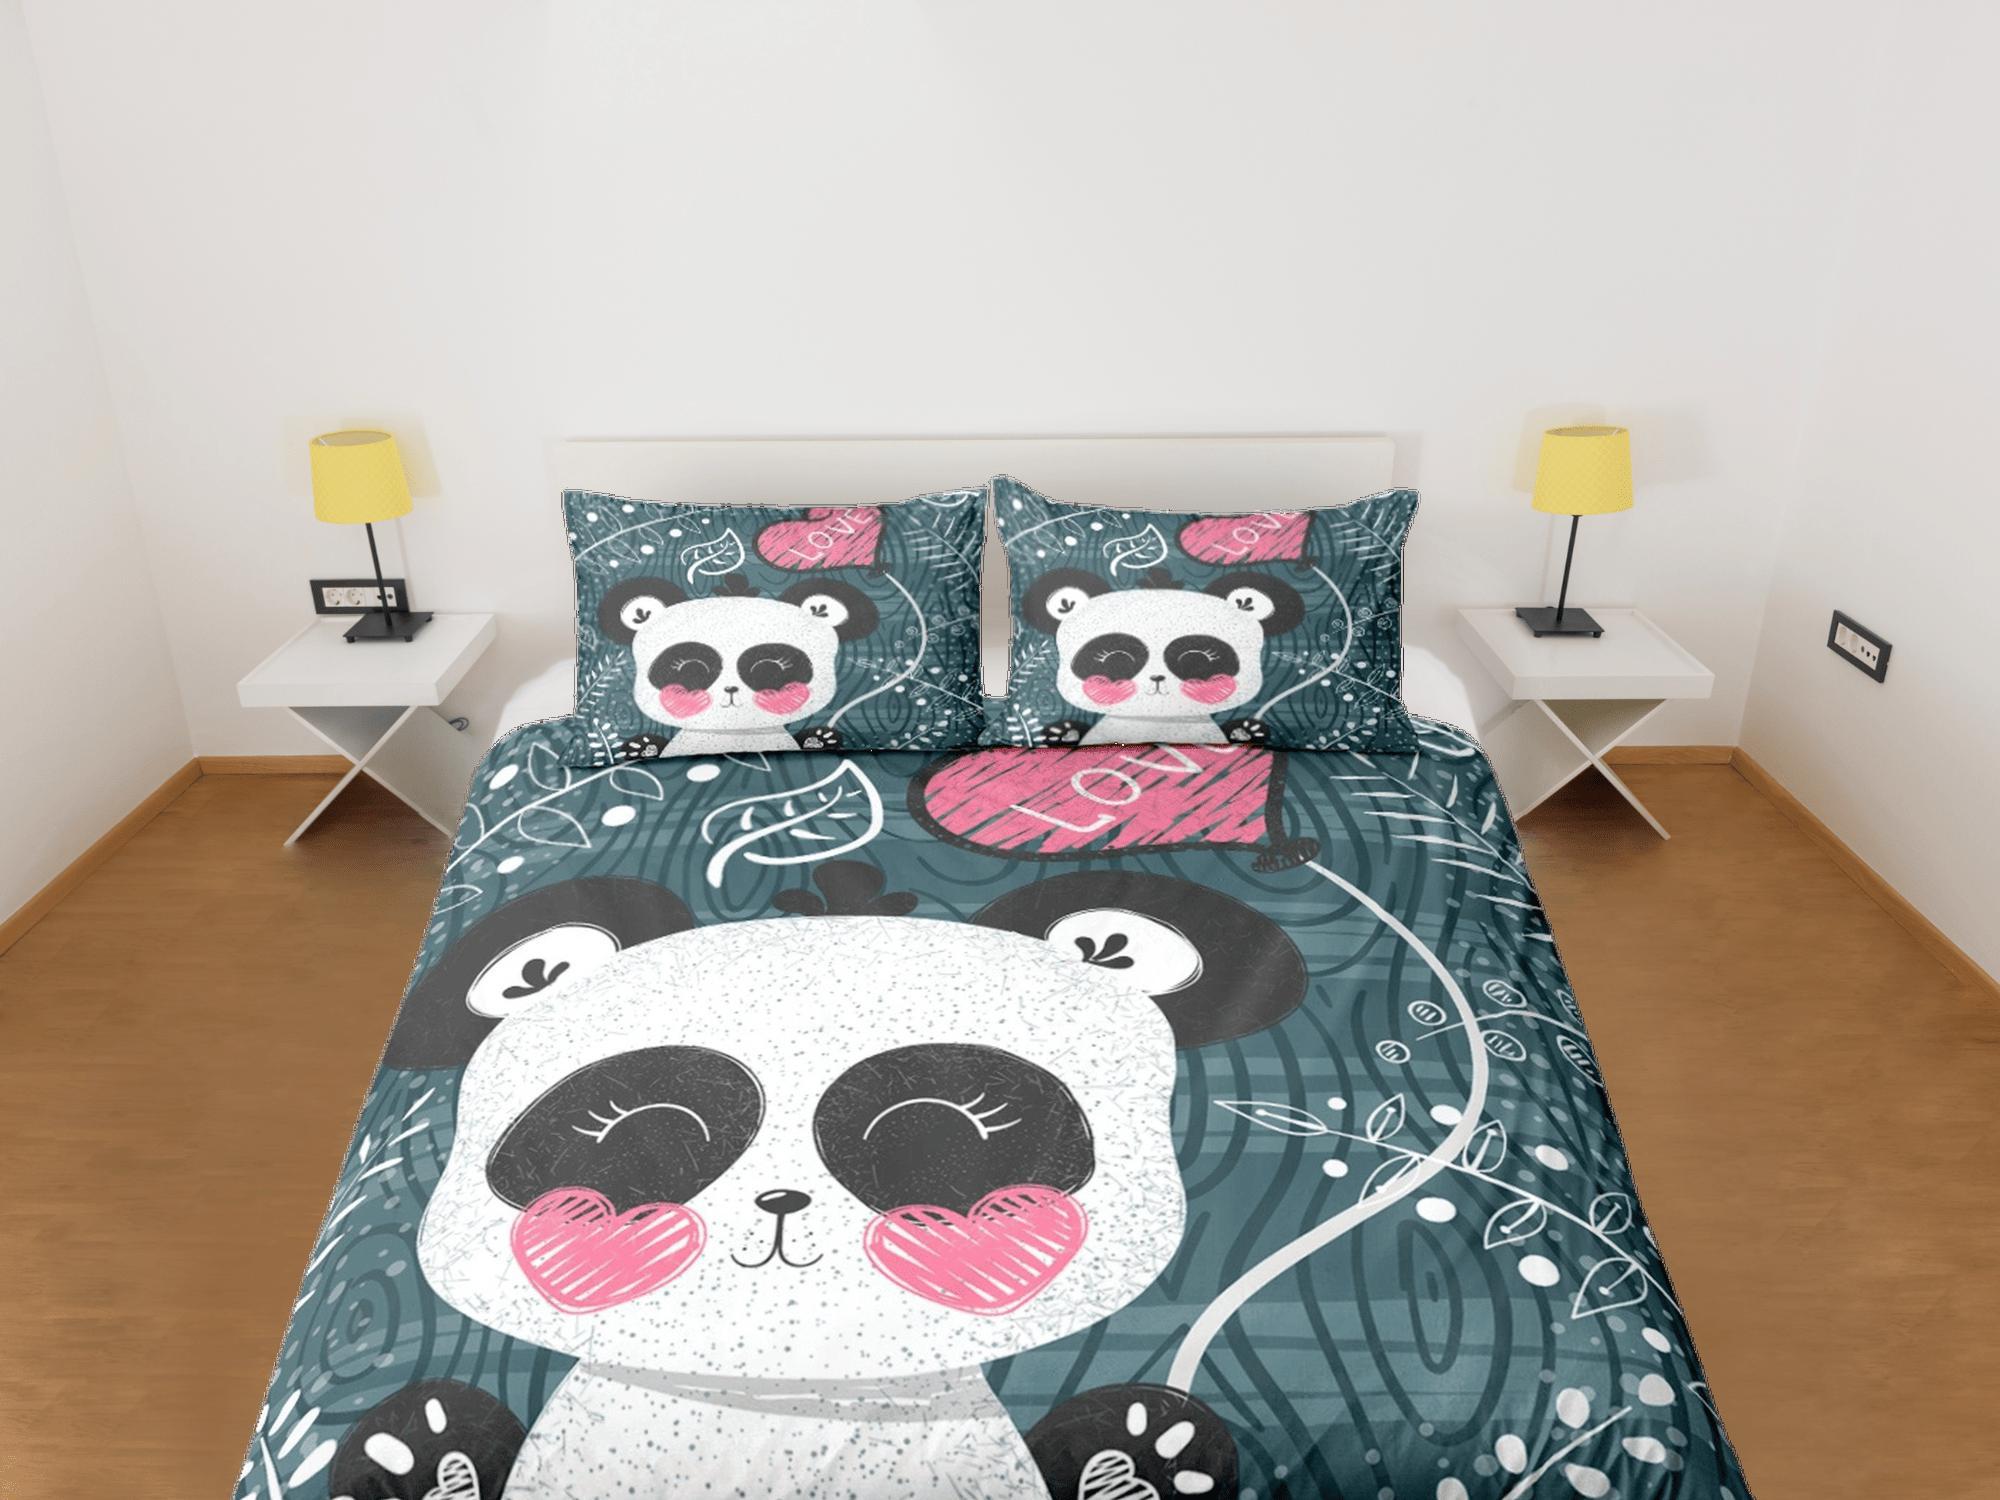 daintyduvet Cute Panda Green Duvet Cover Set Colorful Bedspread, Kids Bedding with Pillowcase